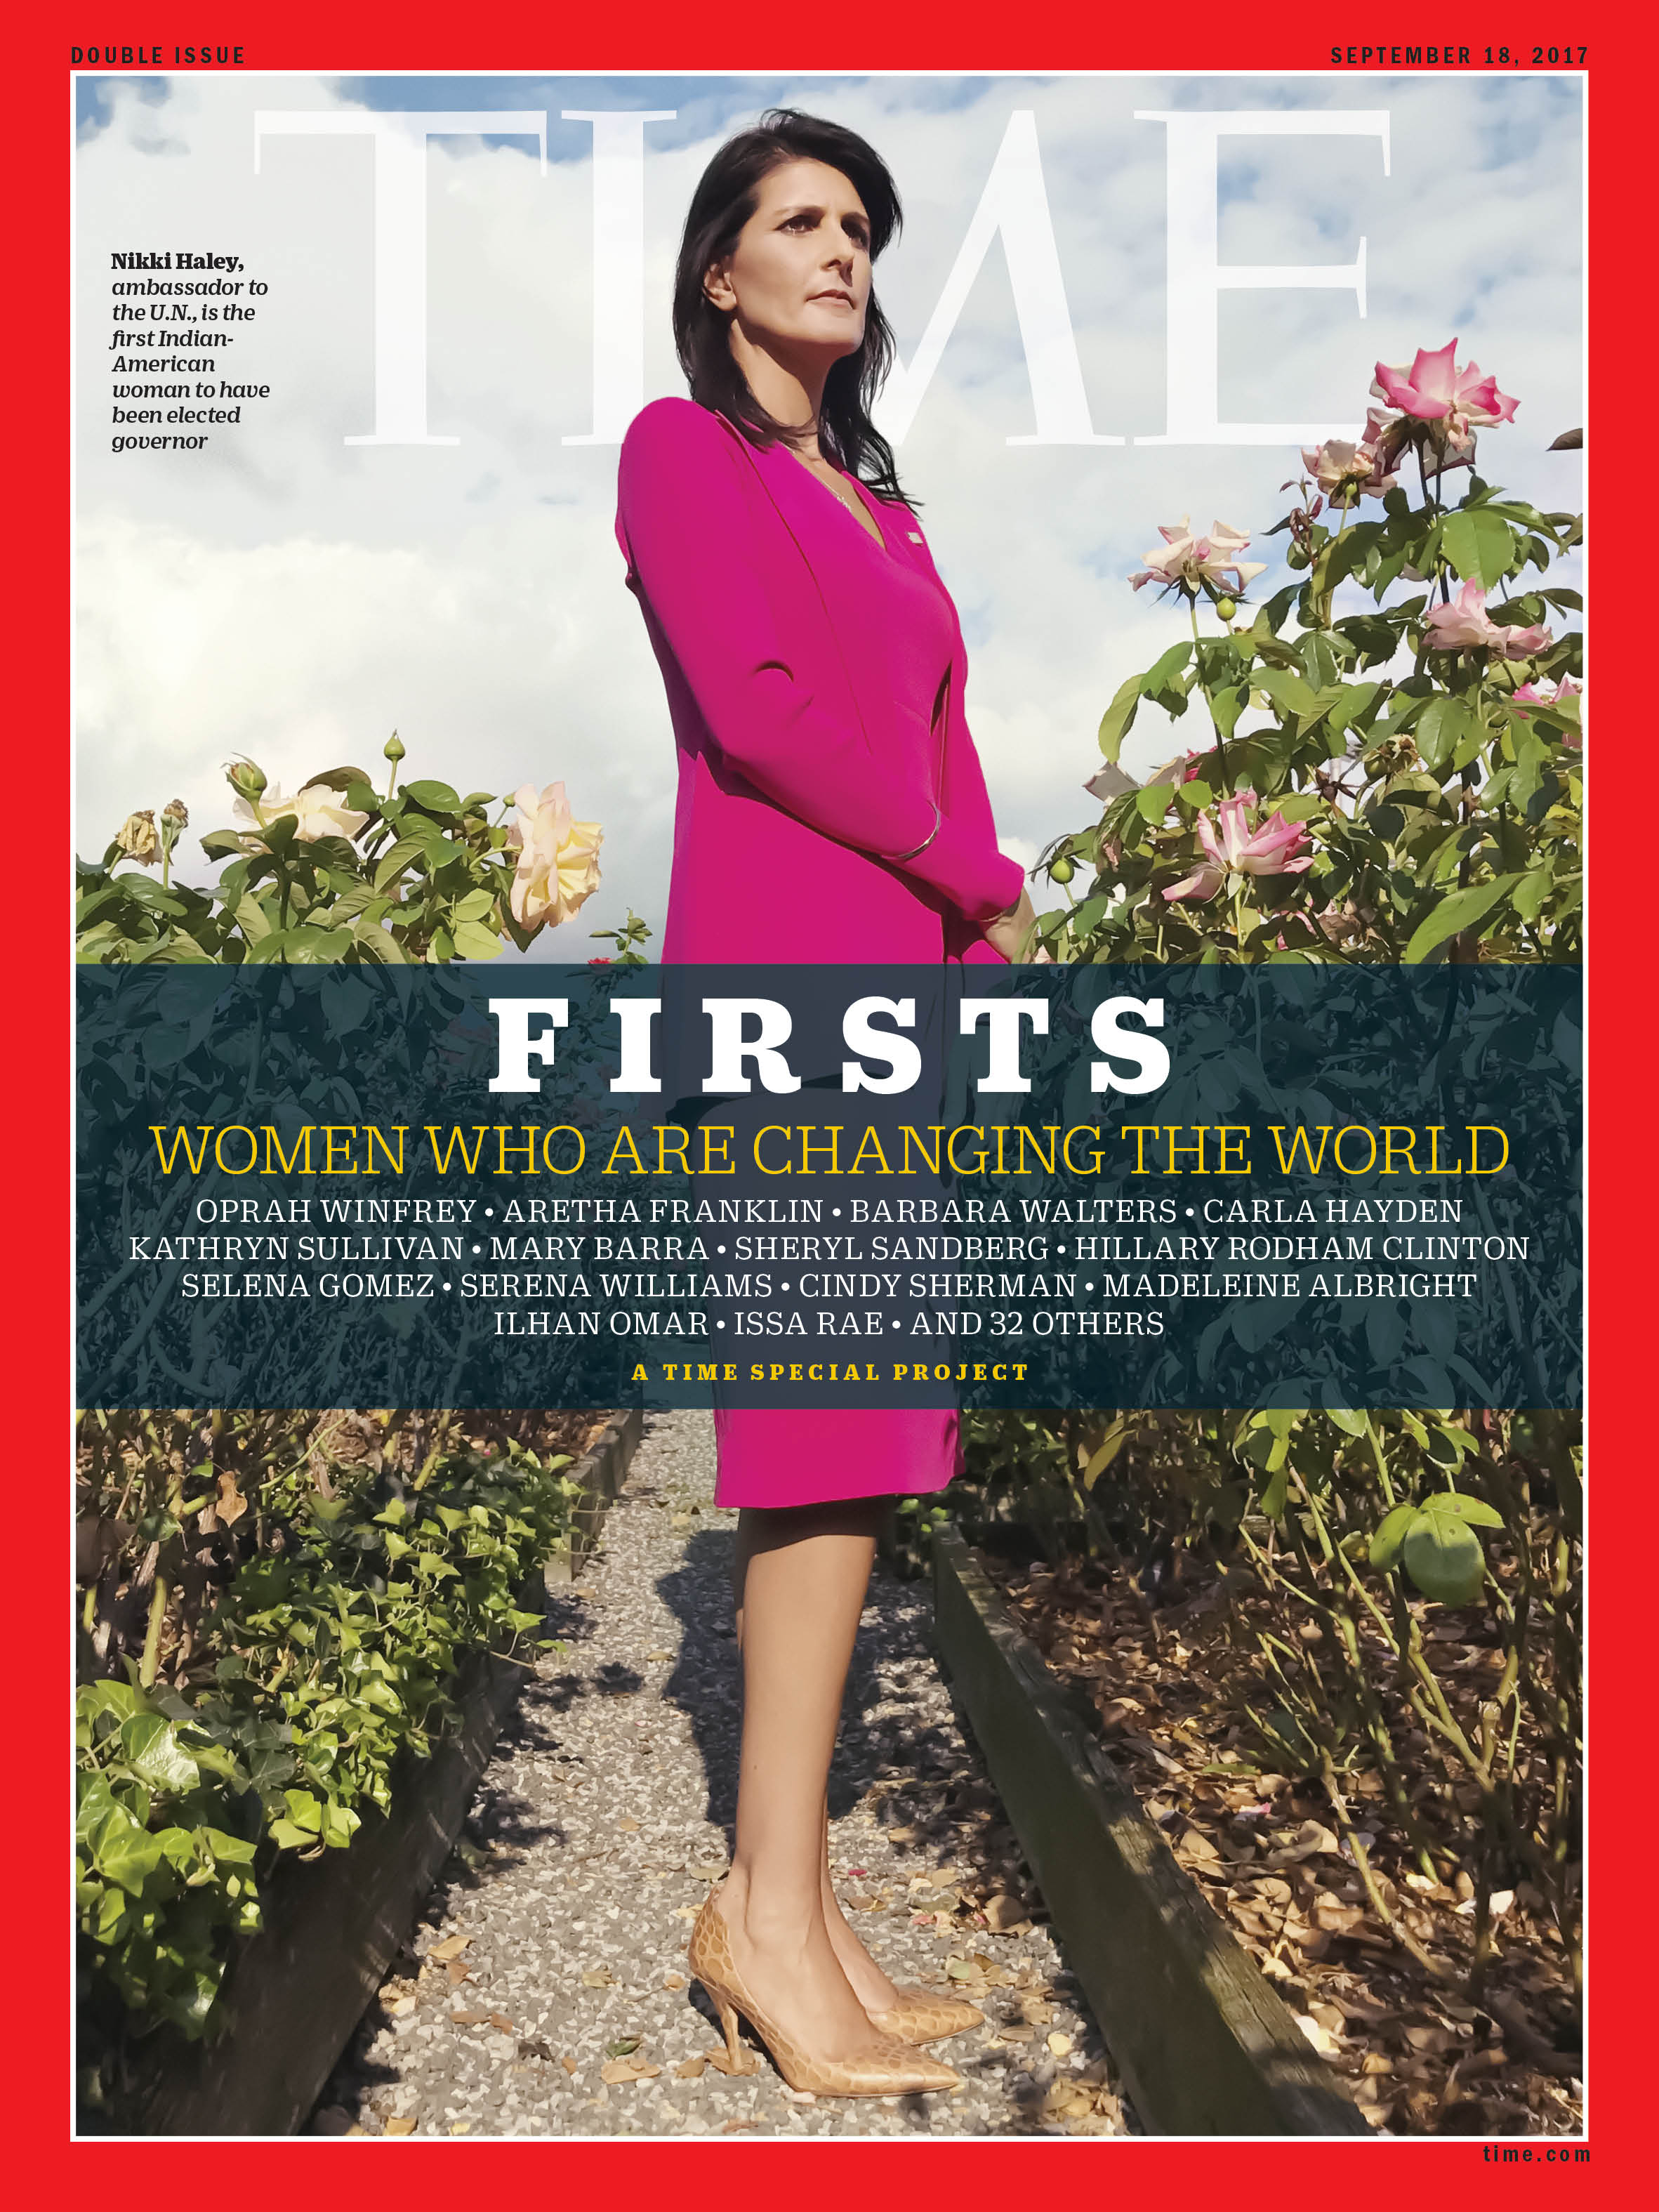 Firsts Women Who Are Changing the World Nikki Haley Time Magazine Cover